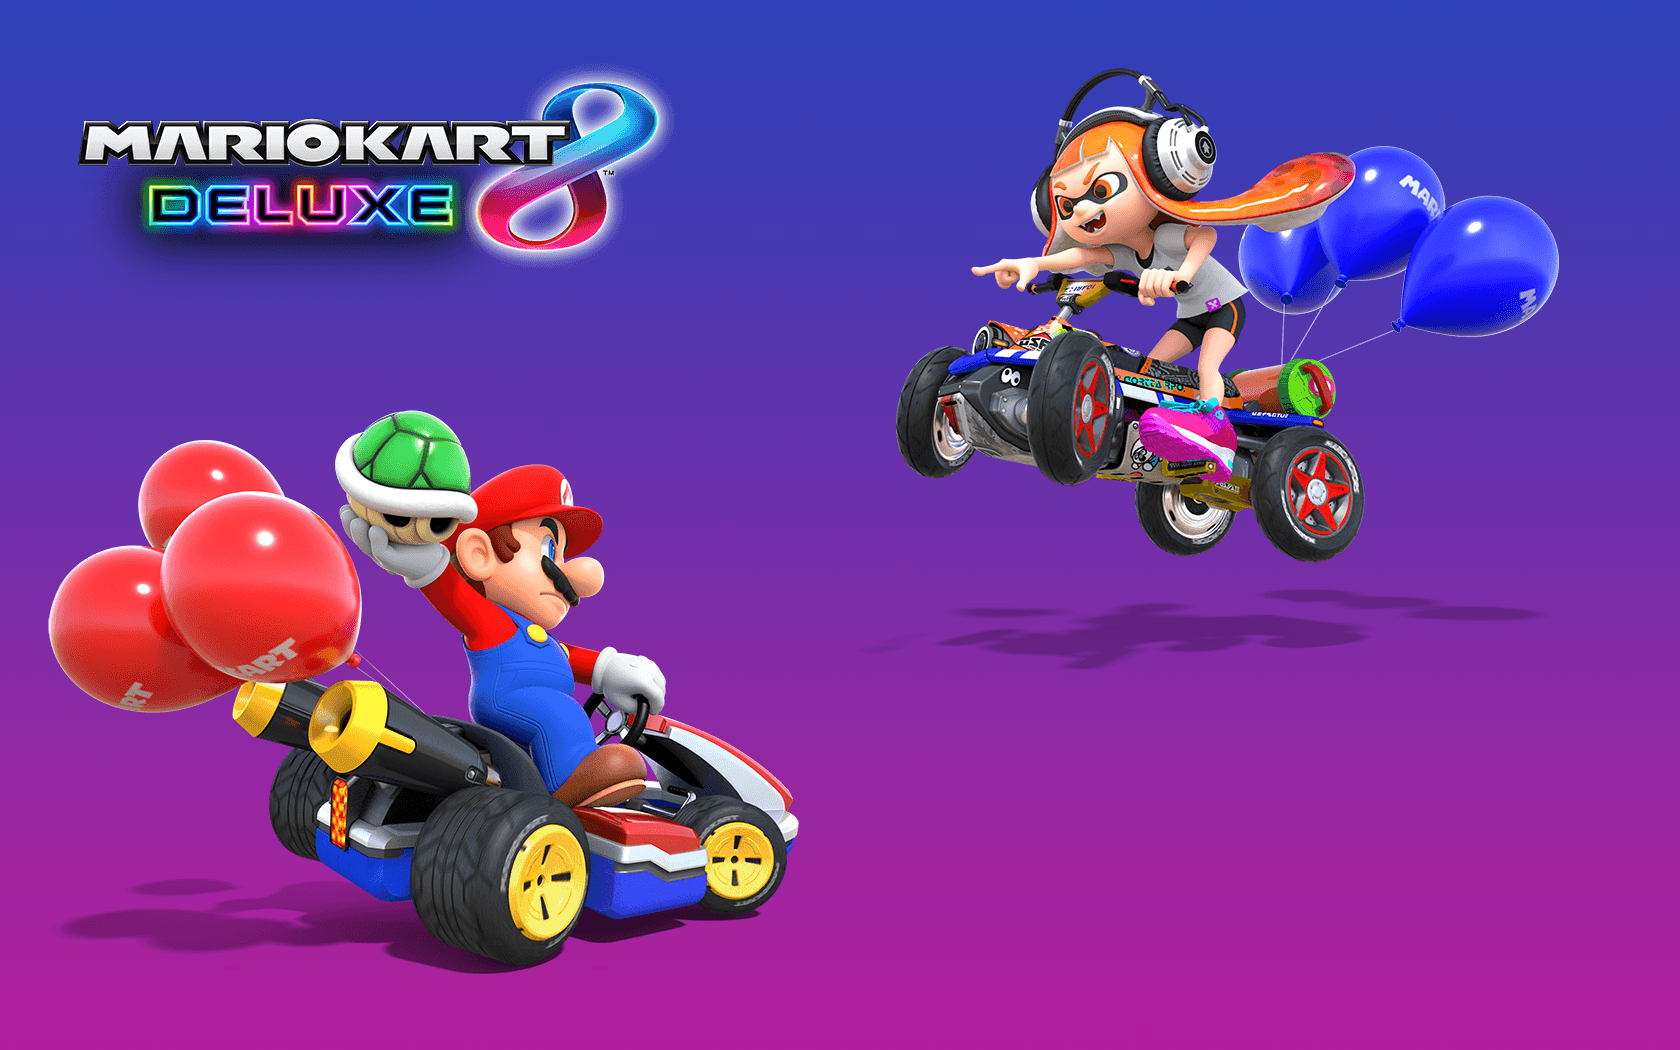 I made this minimalistic wallpaper for Mario Kart 8 Deluxe